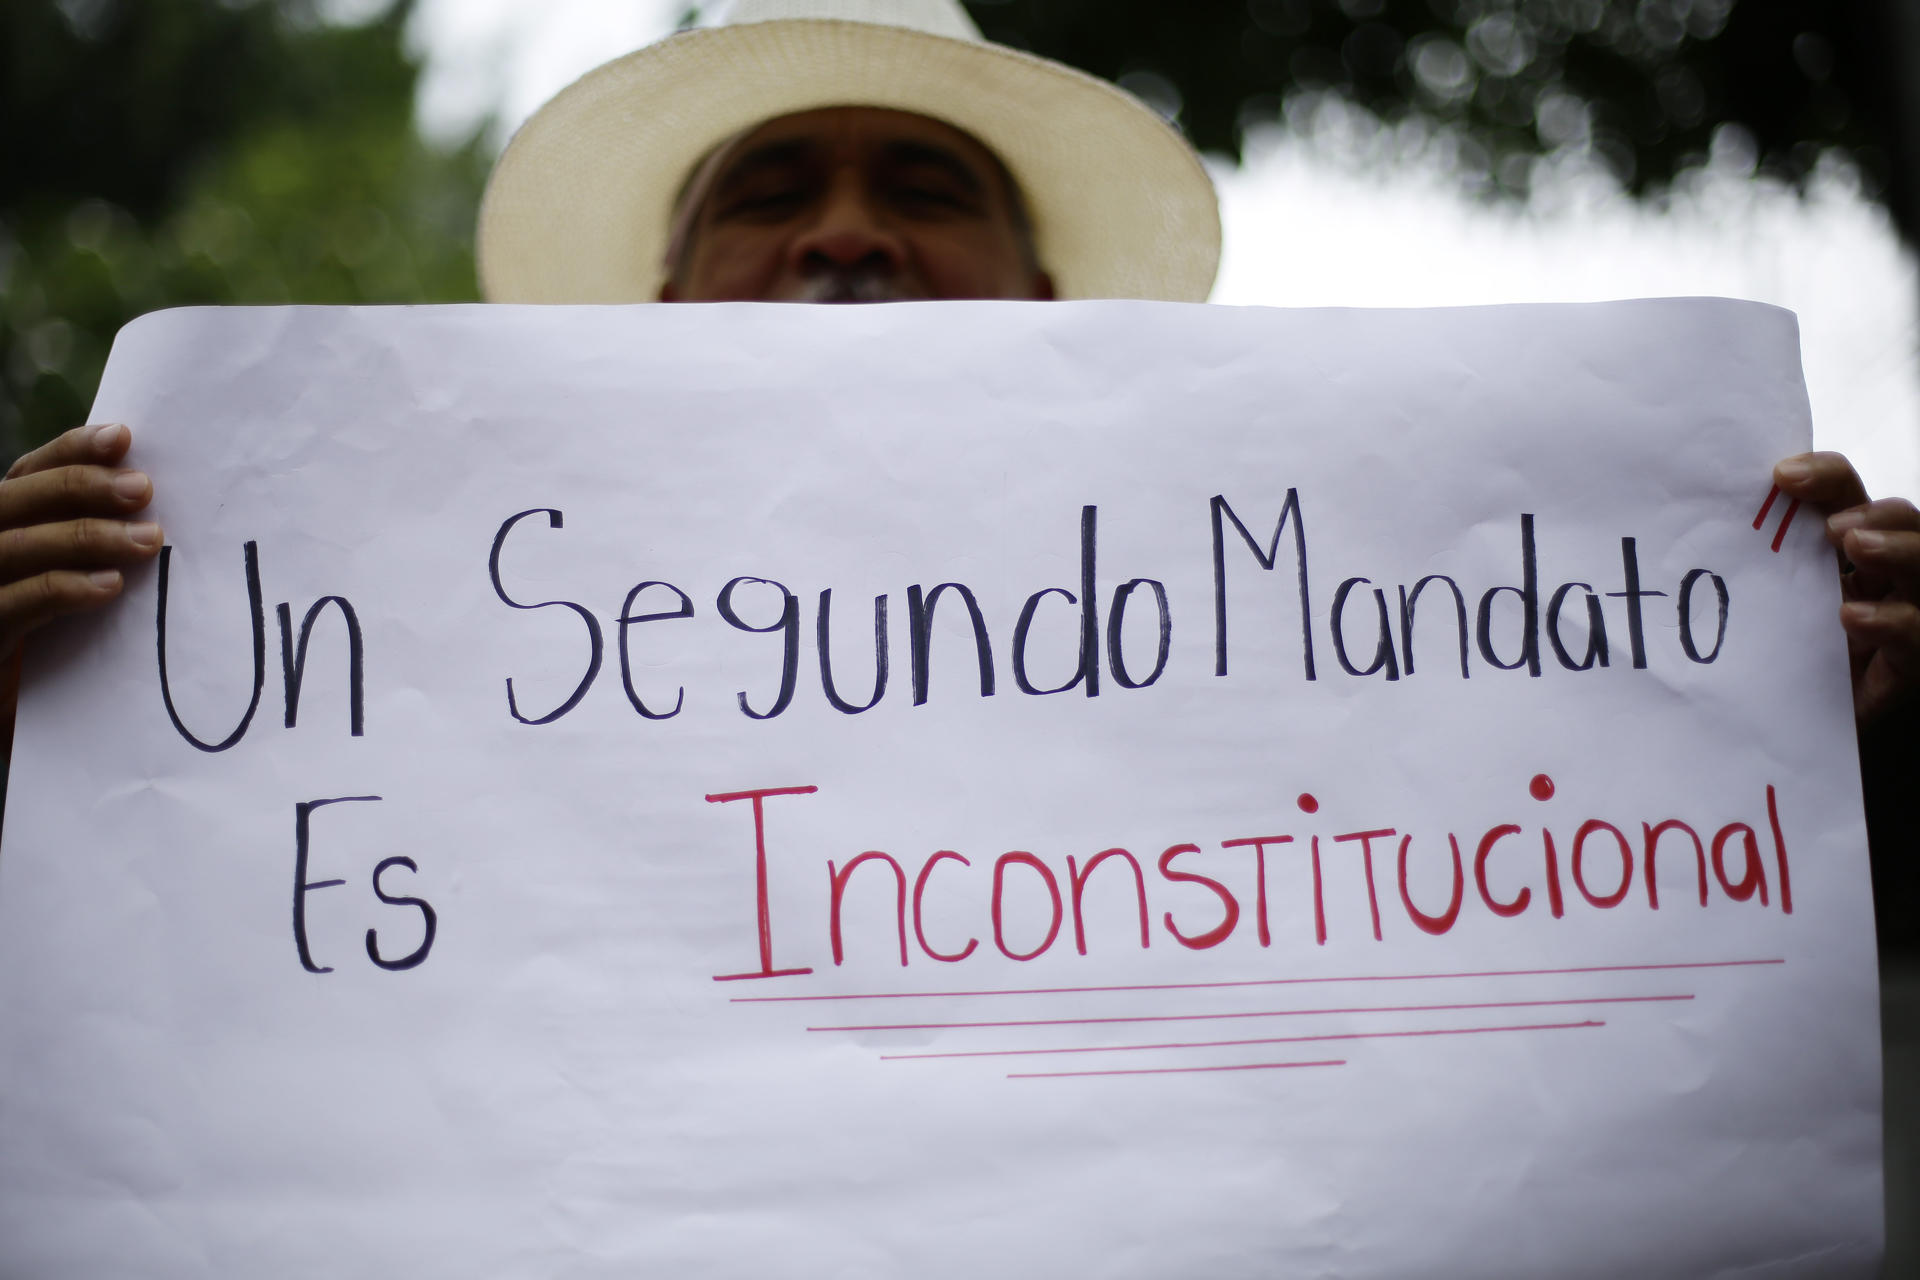 Unions, civil society organizations, students and human rights representatives march in commemoration of International Labor Day, in San Salvador, El Salvador, on May 1, 2023, with this sign reading "a second term is unconstitutional." EFE FILE/Rodrigo Sura
